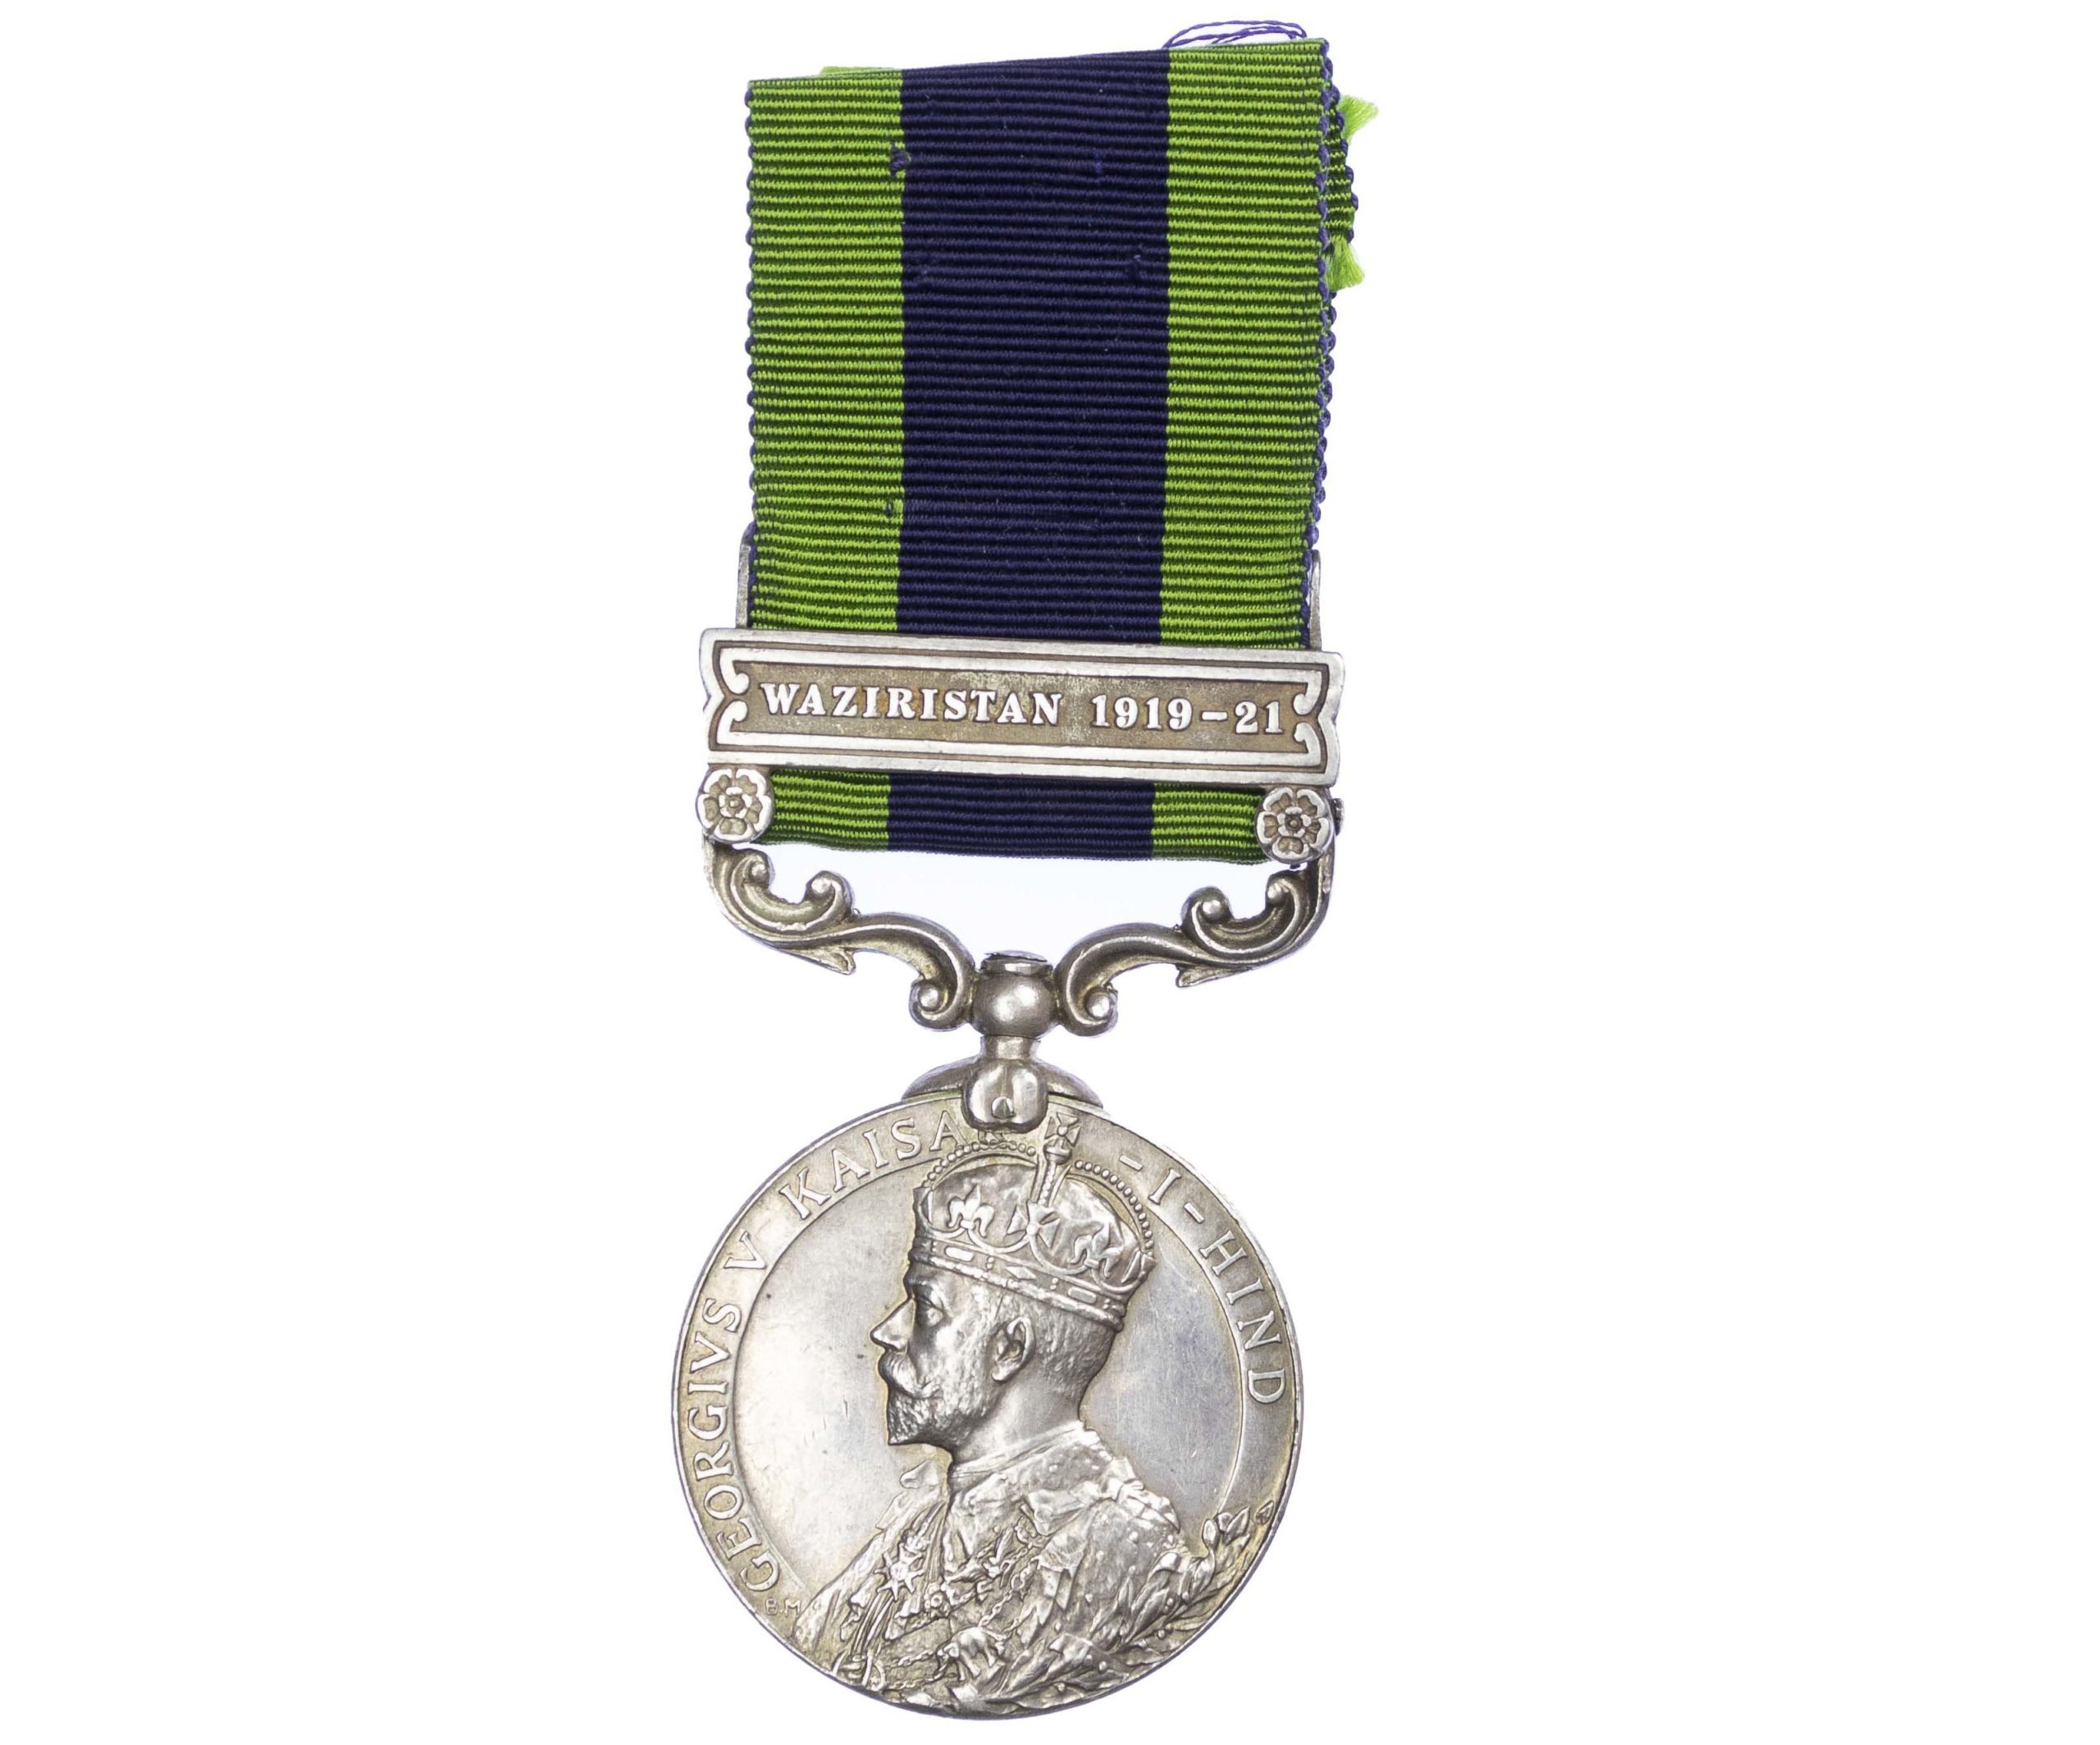 India General Service Medal 1908-1935, GVR, one clasp Waziristan 1919-21, to Jemadar Lall Chand